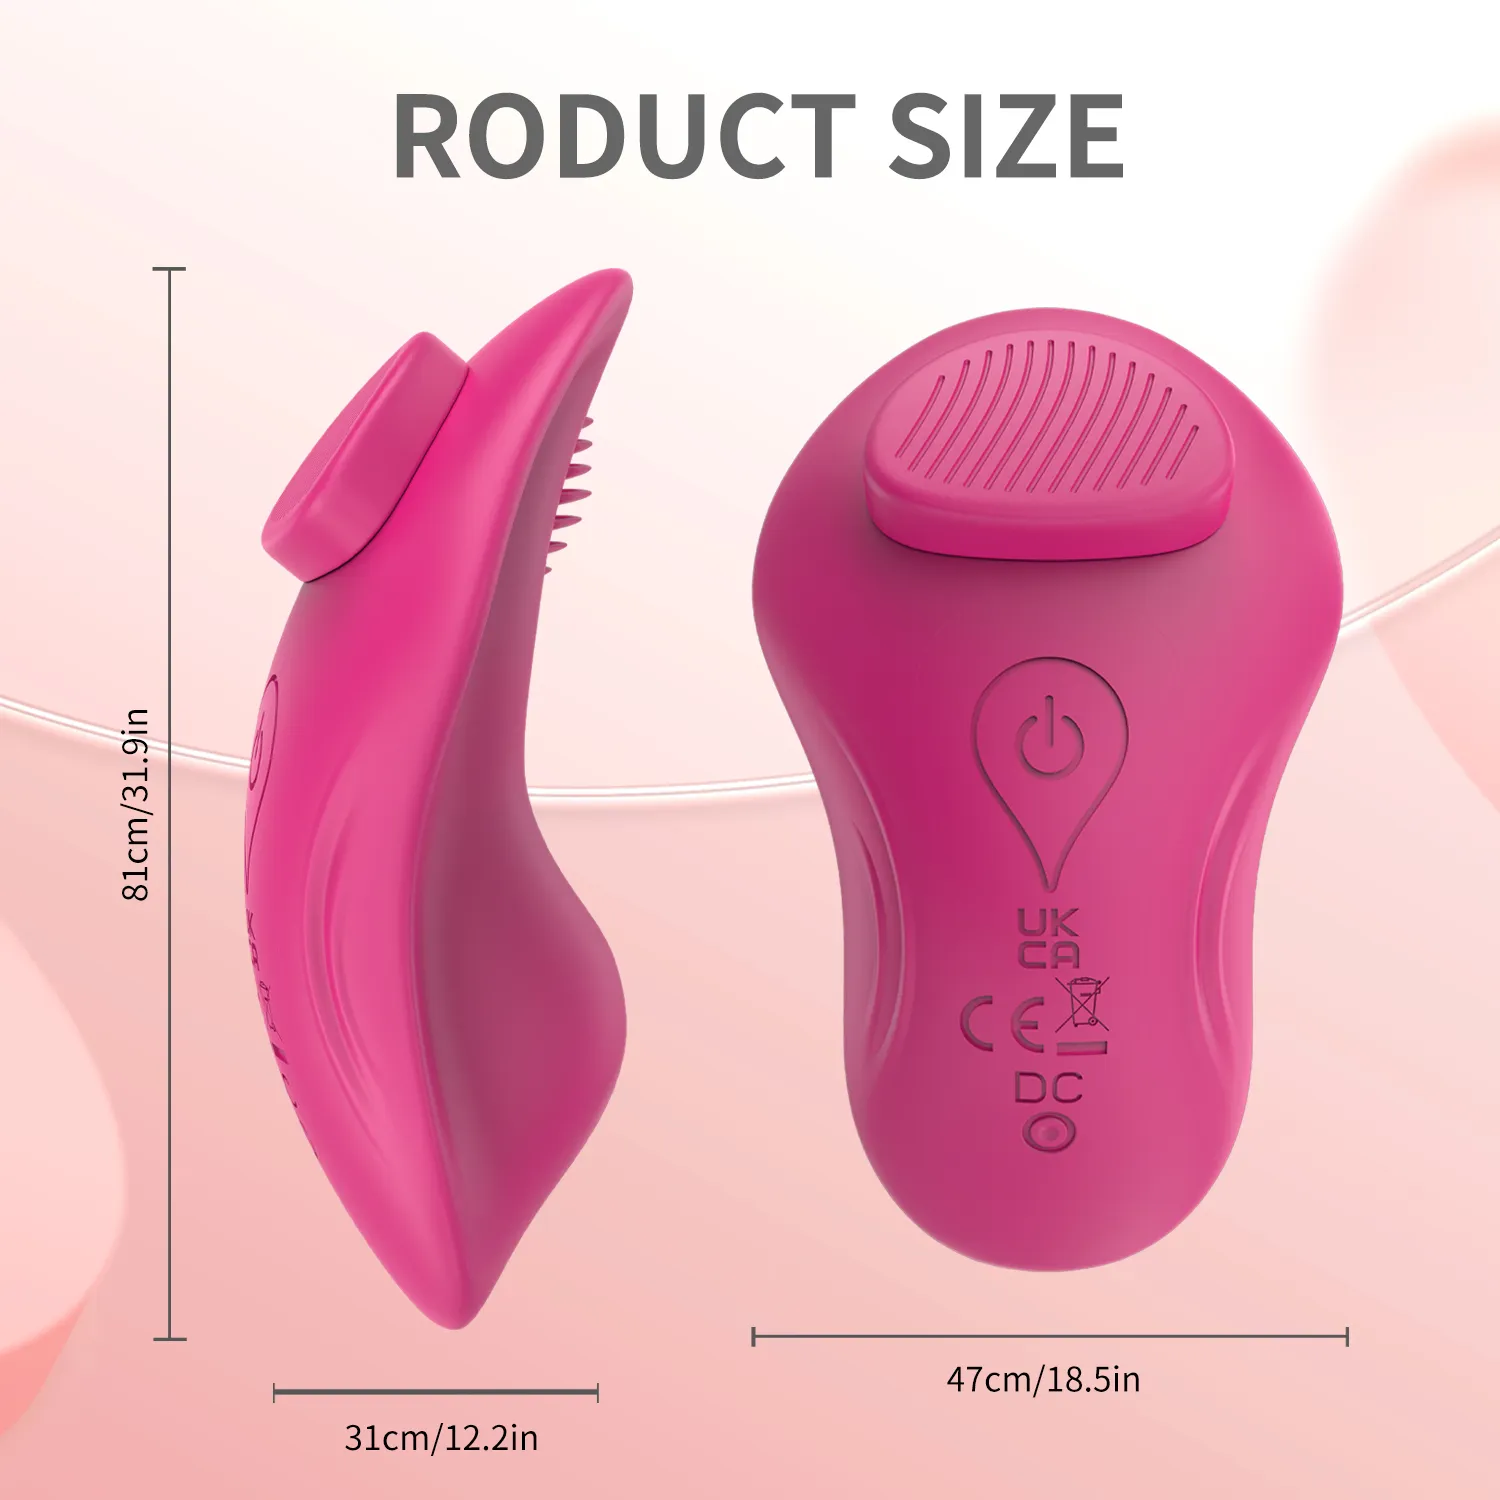 Wearable Bluetooth APP Vibrator for Women Wireless Remote Control Vibrating Egg Clitoris Stimulator Female Sex Toys for Couples Sex Toys For Women cb5feb1b7314637725a2e7: CD51-APP-PK|CD51-APP-PK-BOX|CD51-APP-RD|CD51-APP-RD-BOX|CD52-APP-PK|CD52-APP-PK-BOX|CD52-APP-RD|CD52-APP-RD-BOX